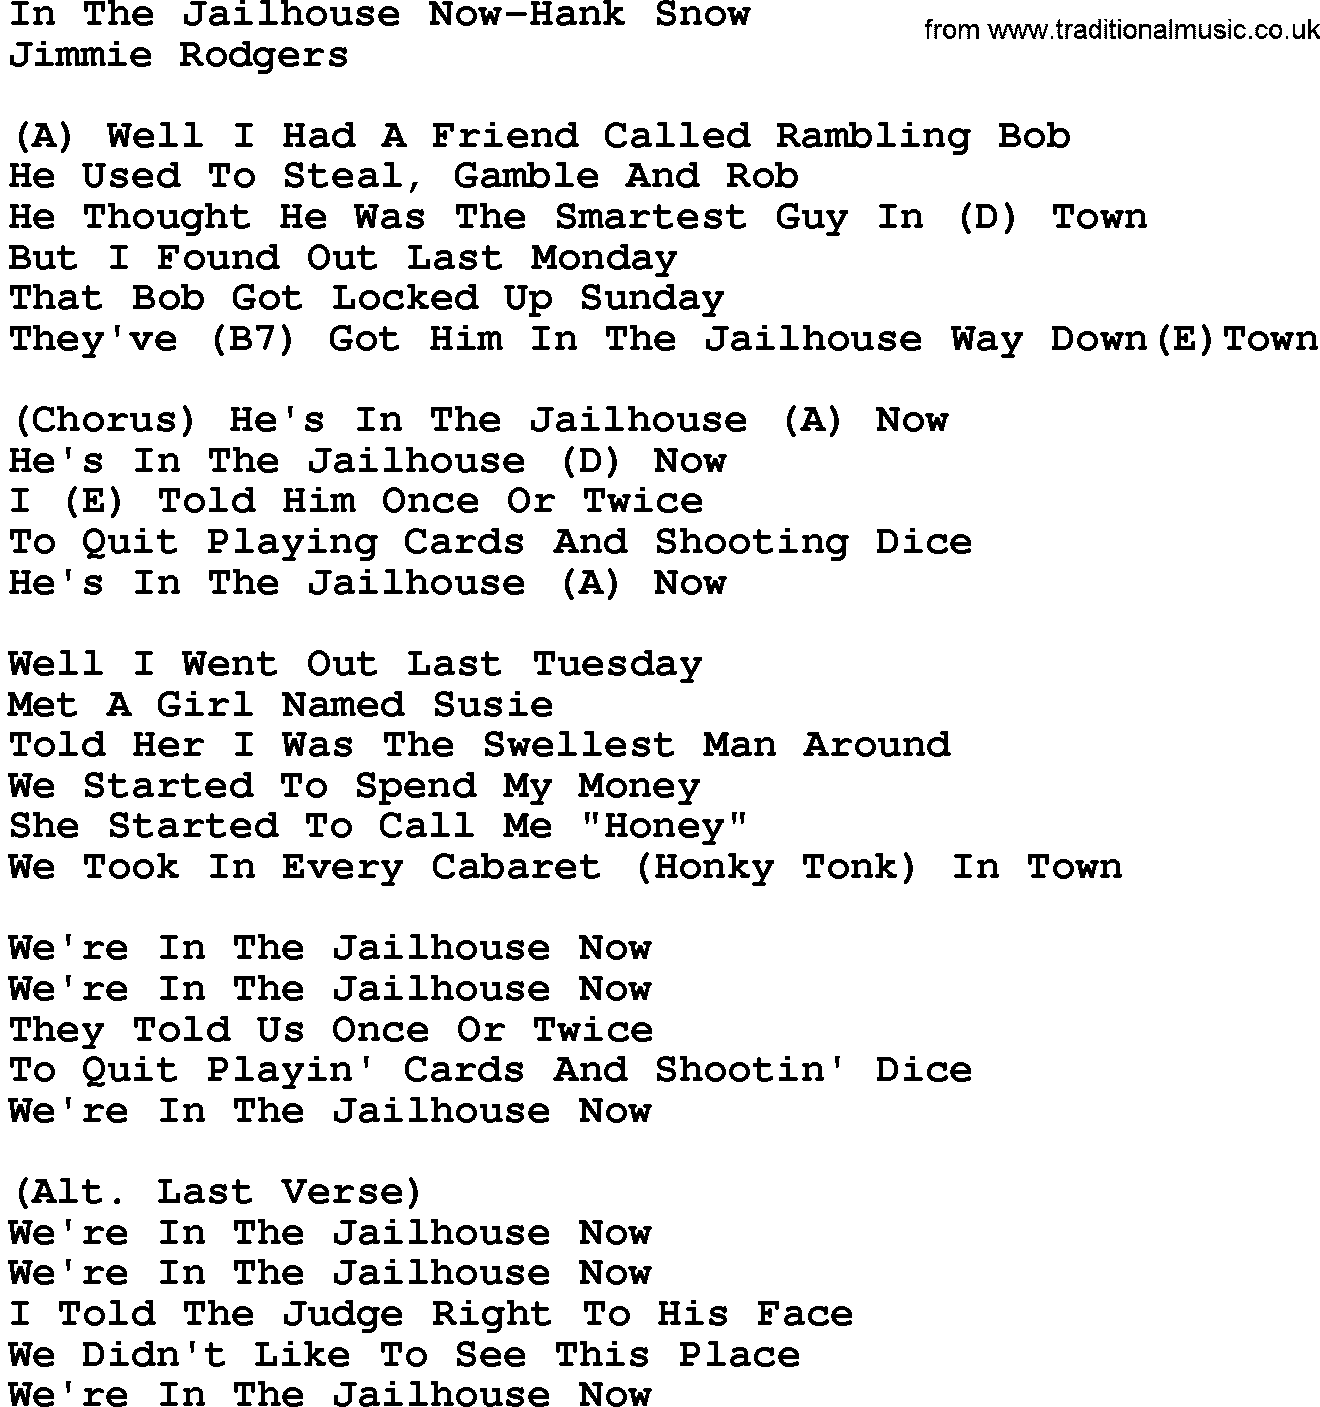 Country music song: In The Jailhouse Now-Hank Snow lyrics and chords